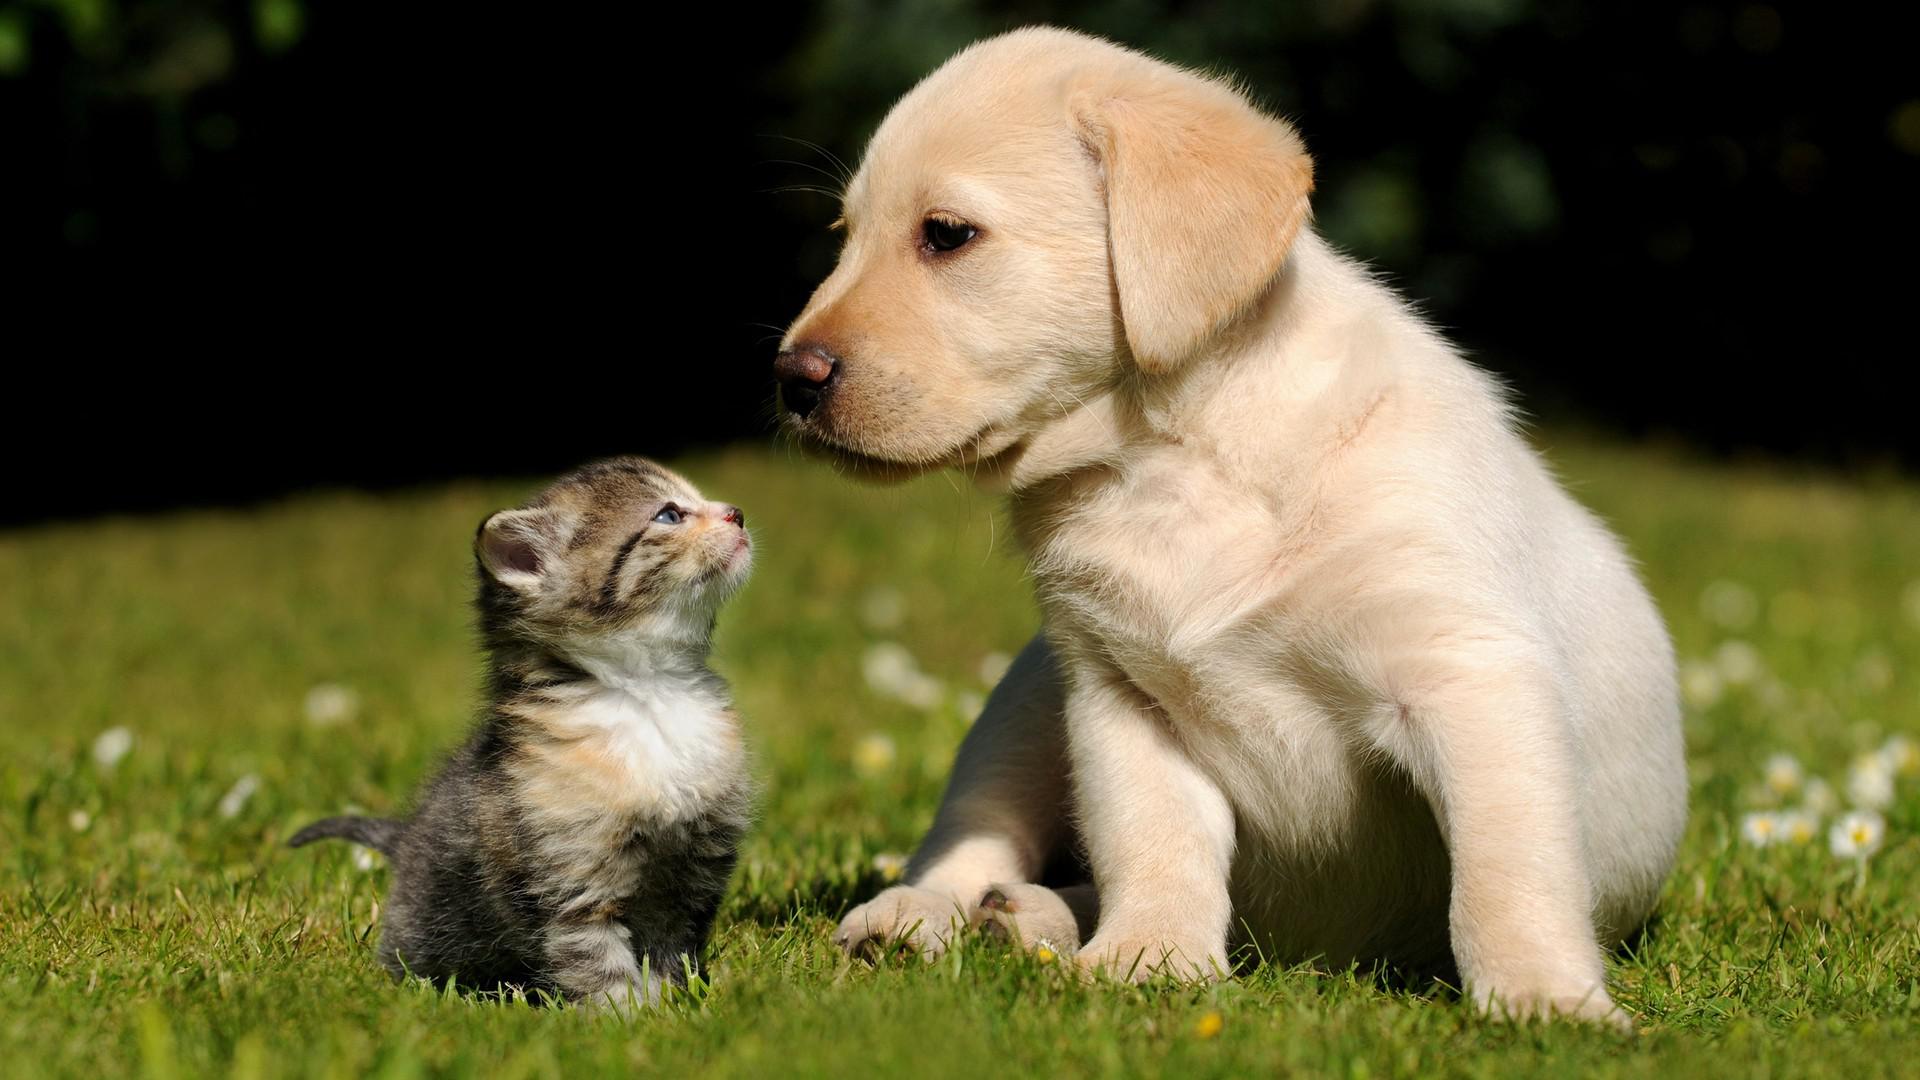 mobile desktop background cute dog and cat pictures with captions download